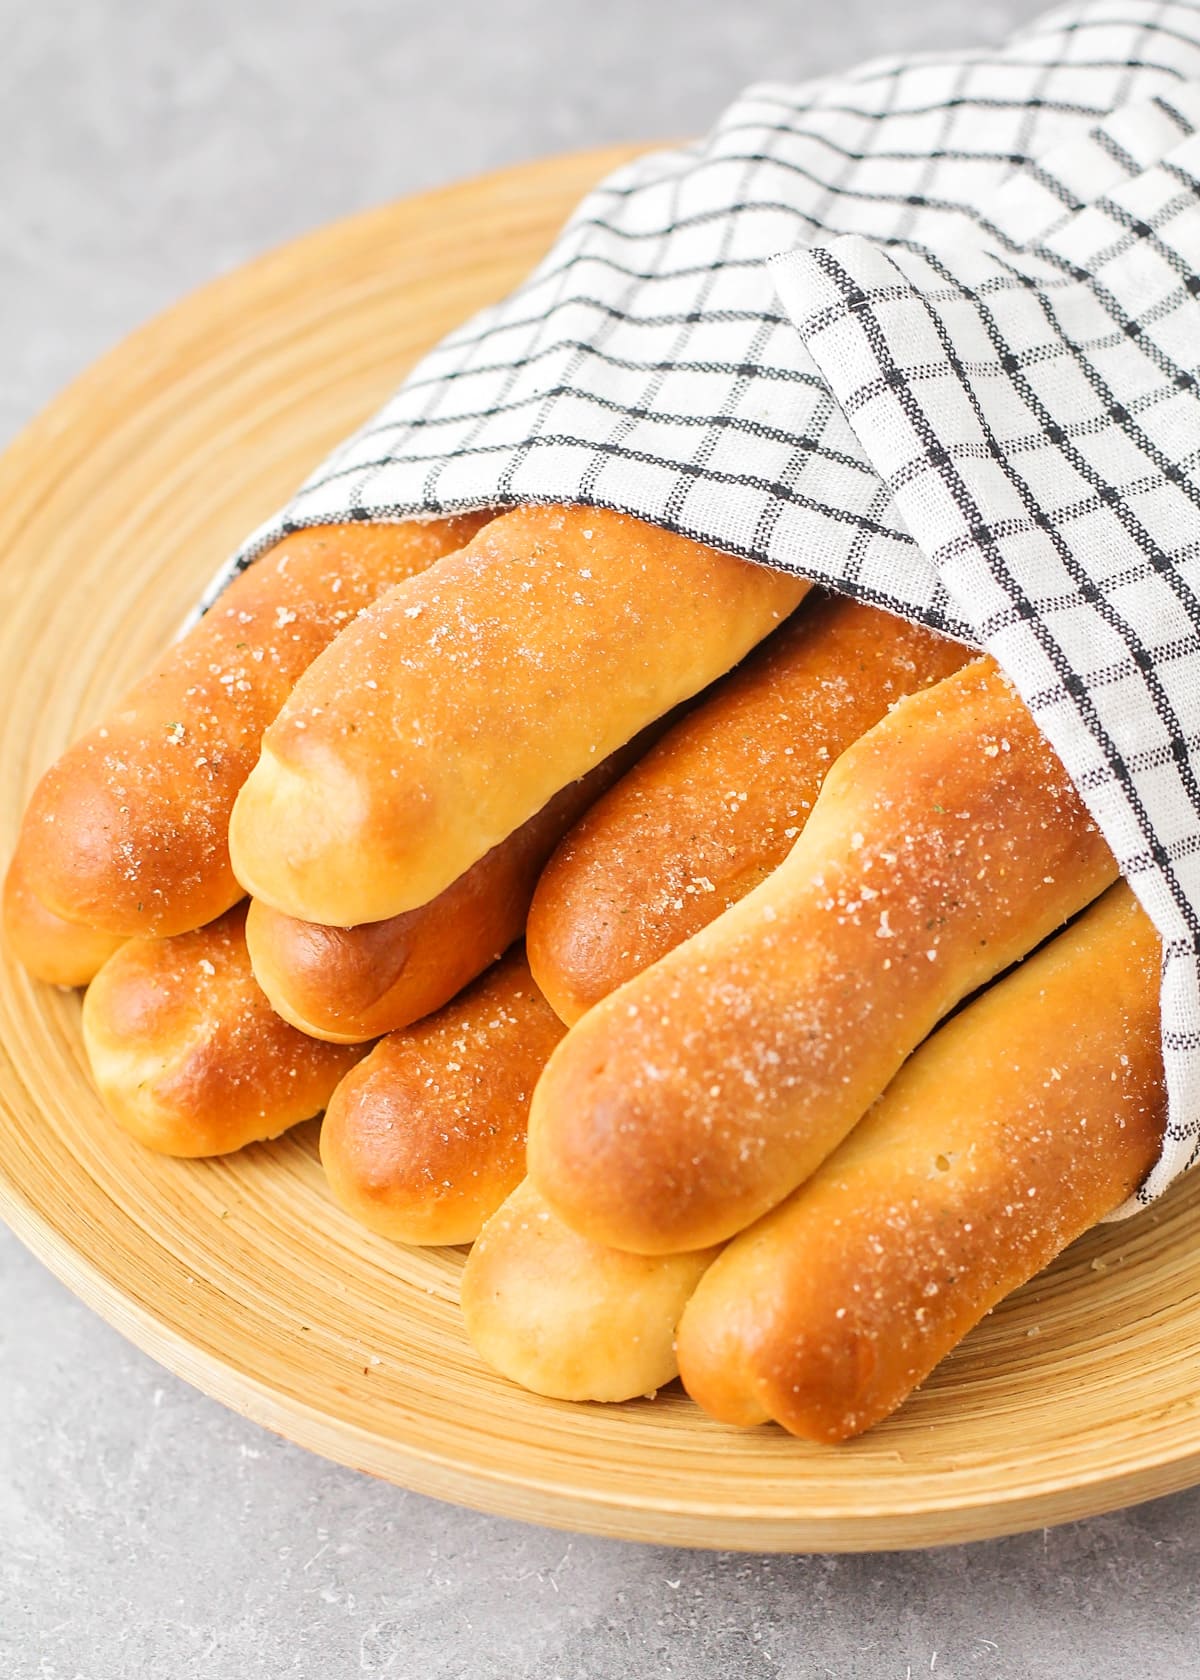 Close up of Olive Garden breadsticks wrapped in a towel on a wooden plate.